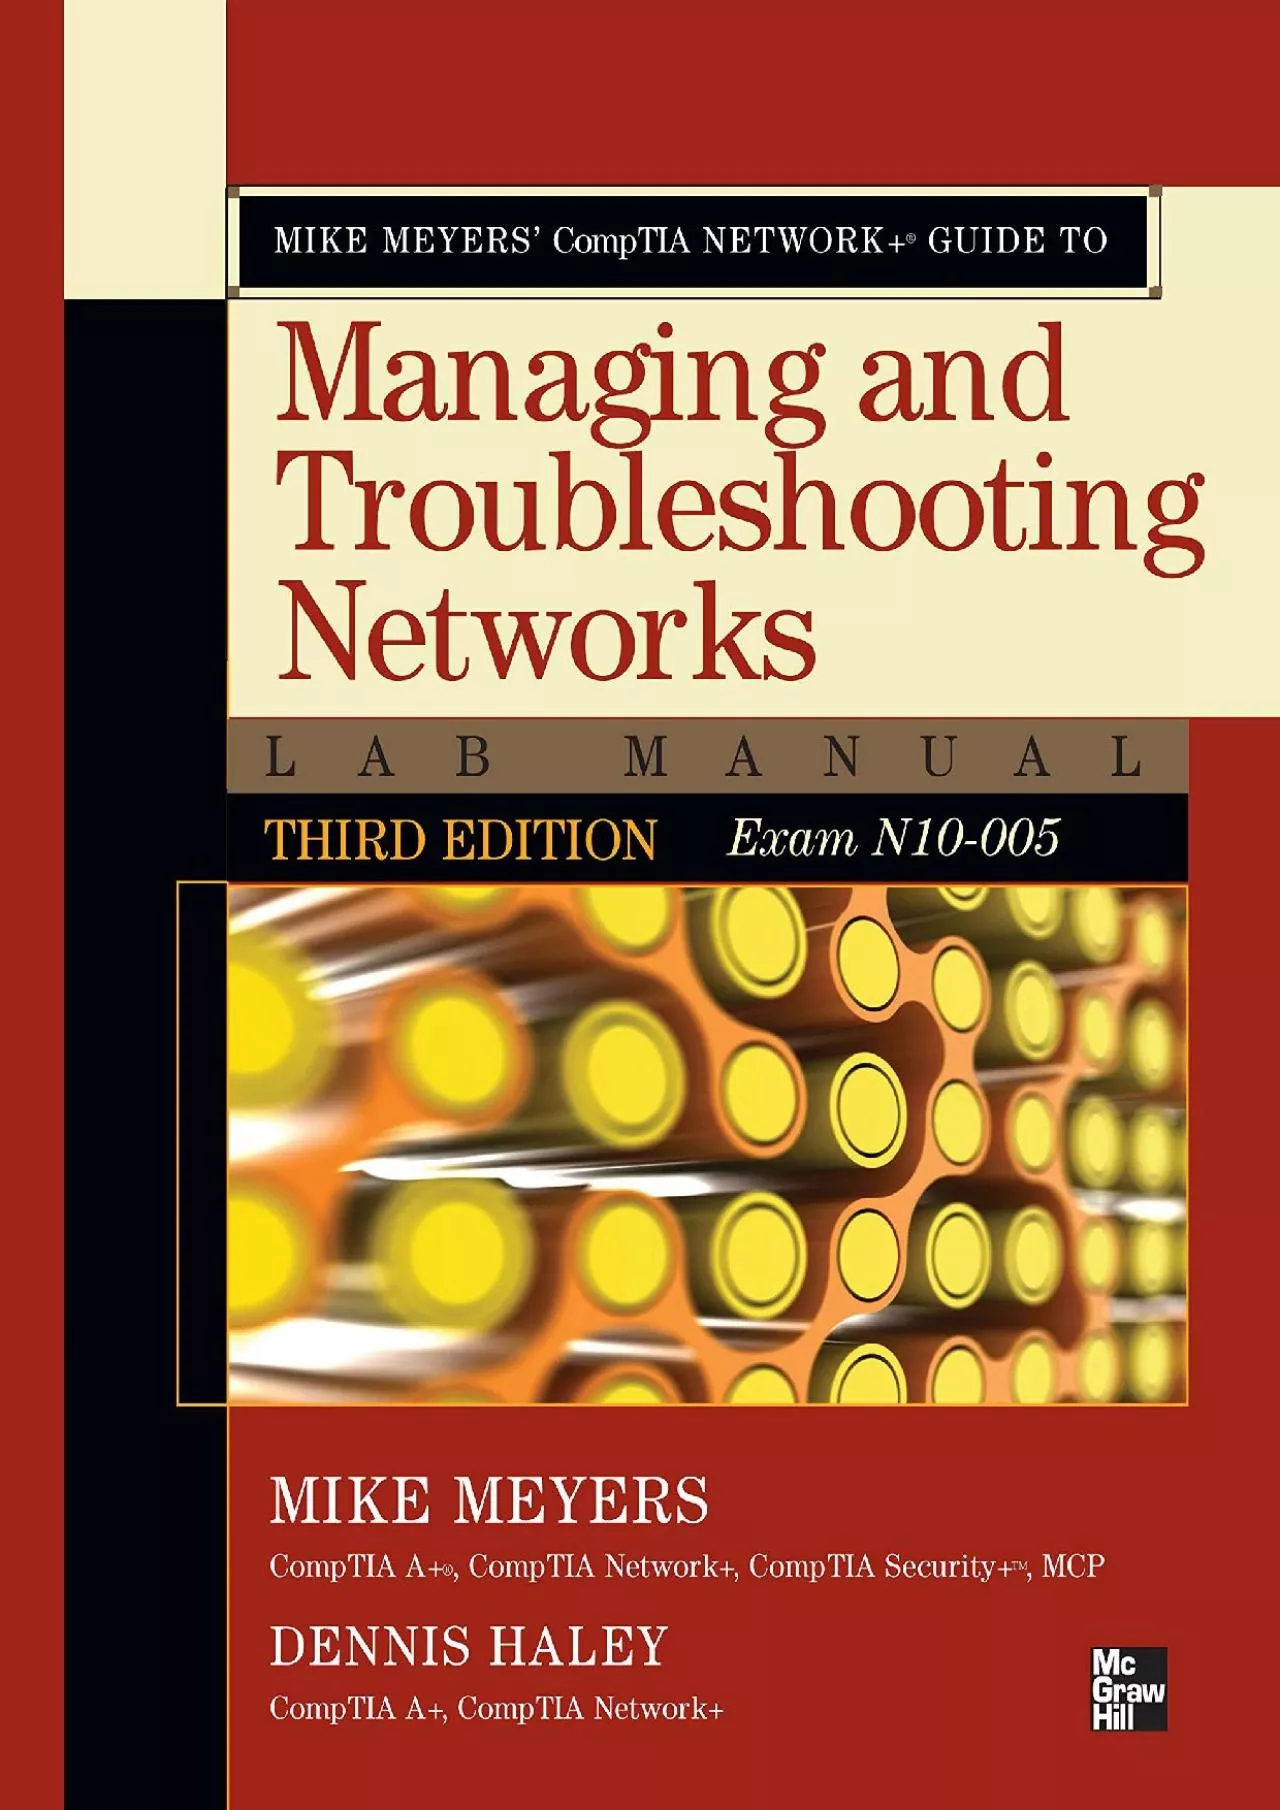 [READING BOOK]-Mike Meyers\' CompTIA Network+ Guide to Managing and Troubleshooting Networks